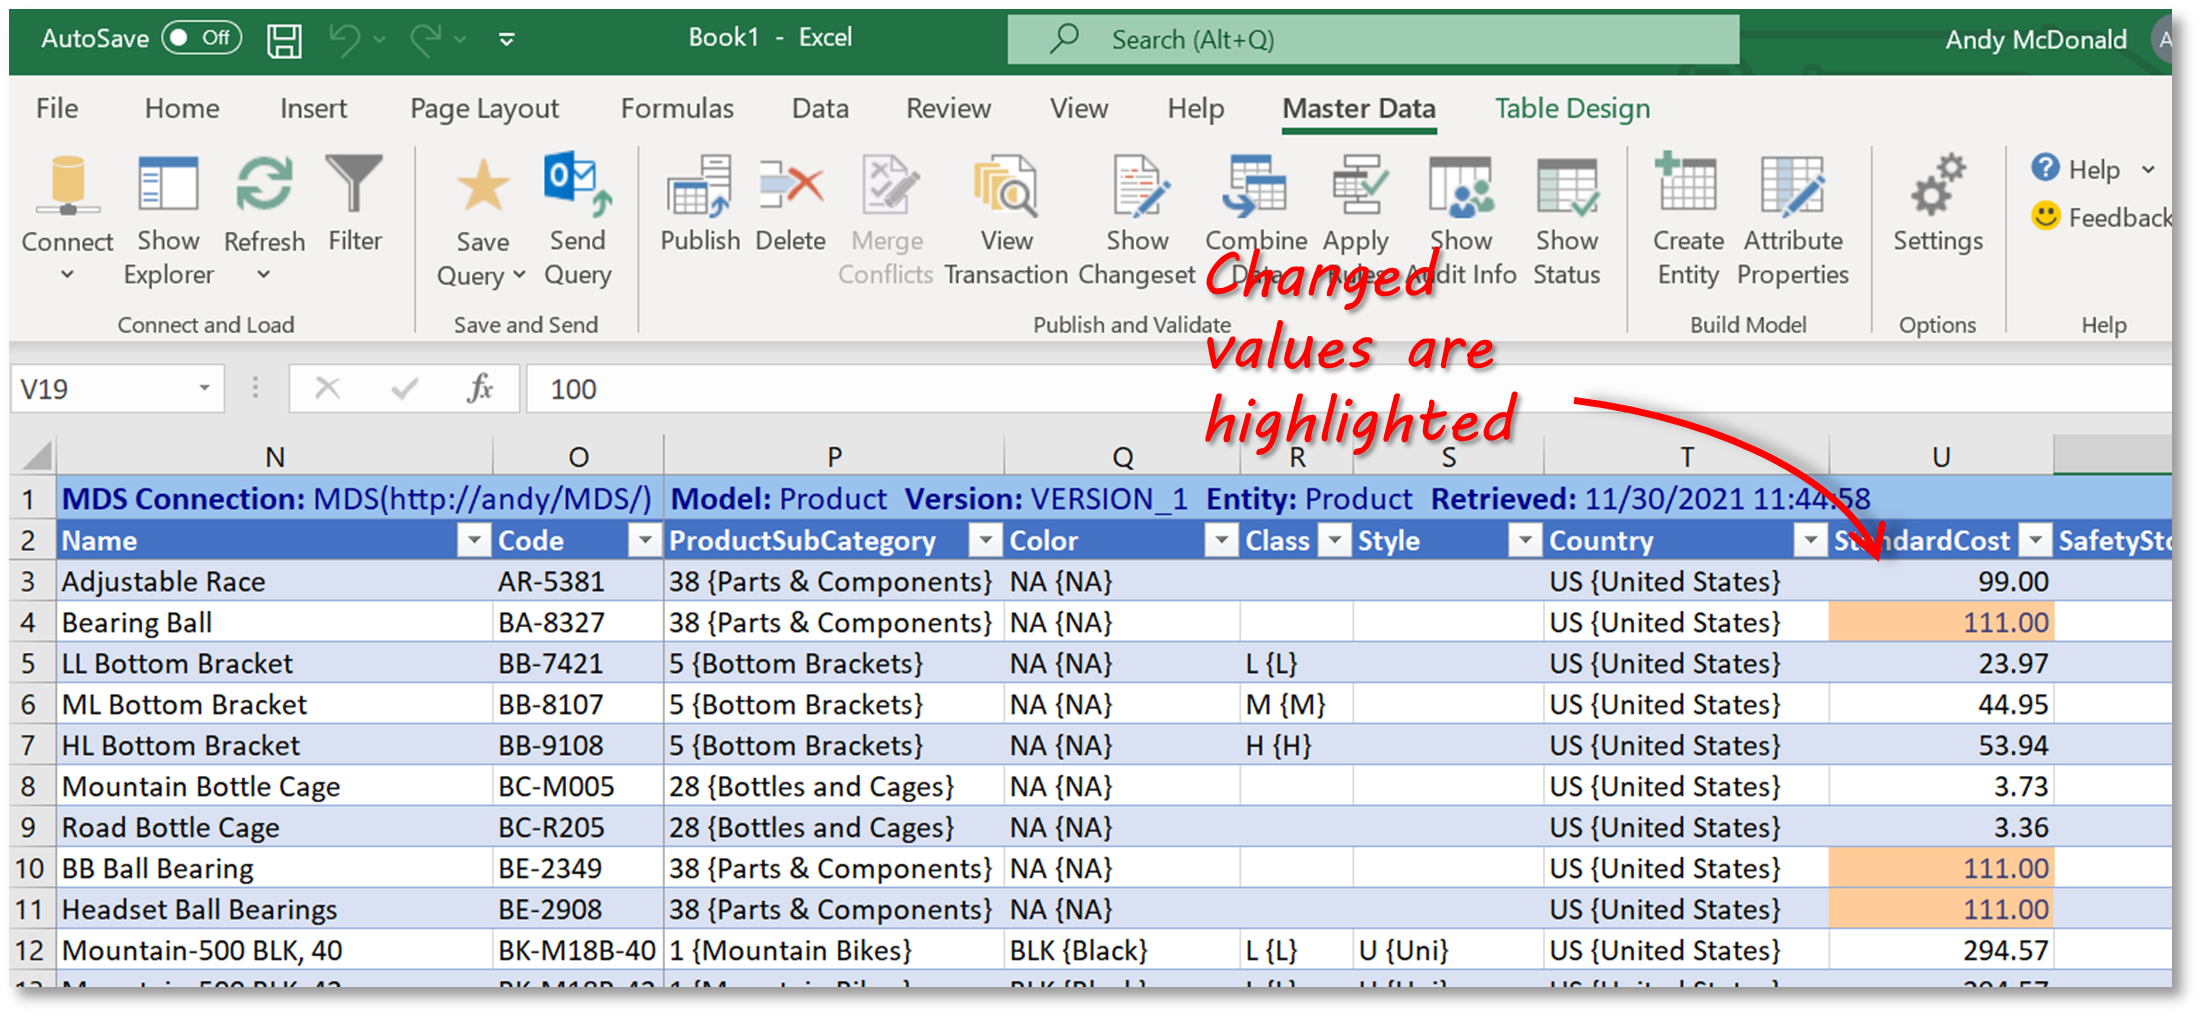 MDS Product StandardCost Changed Values